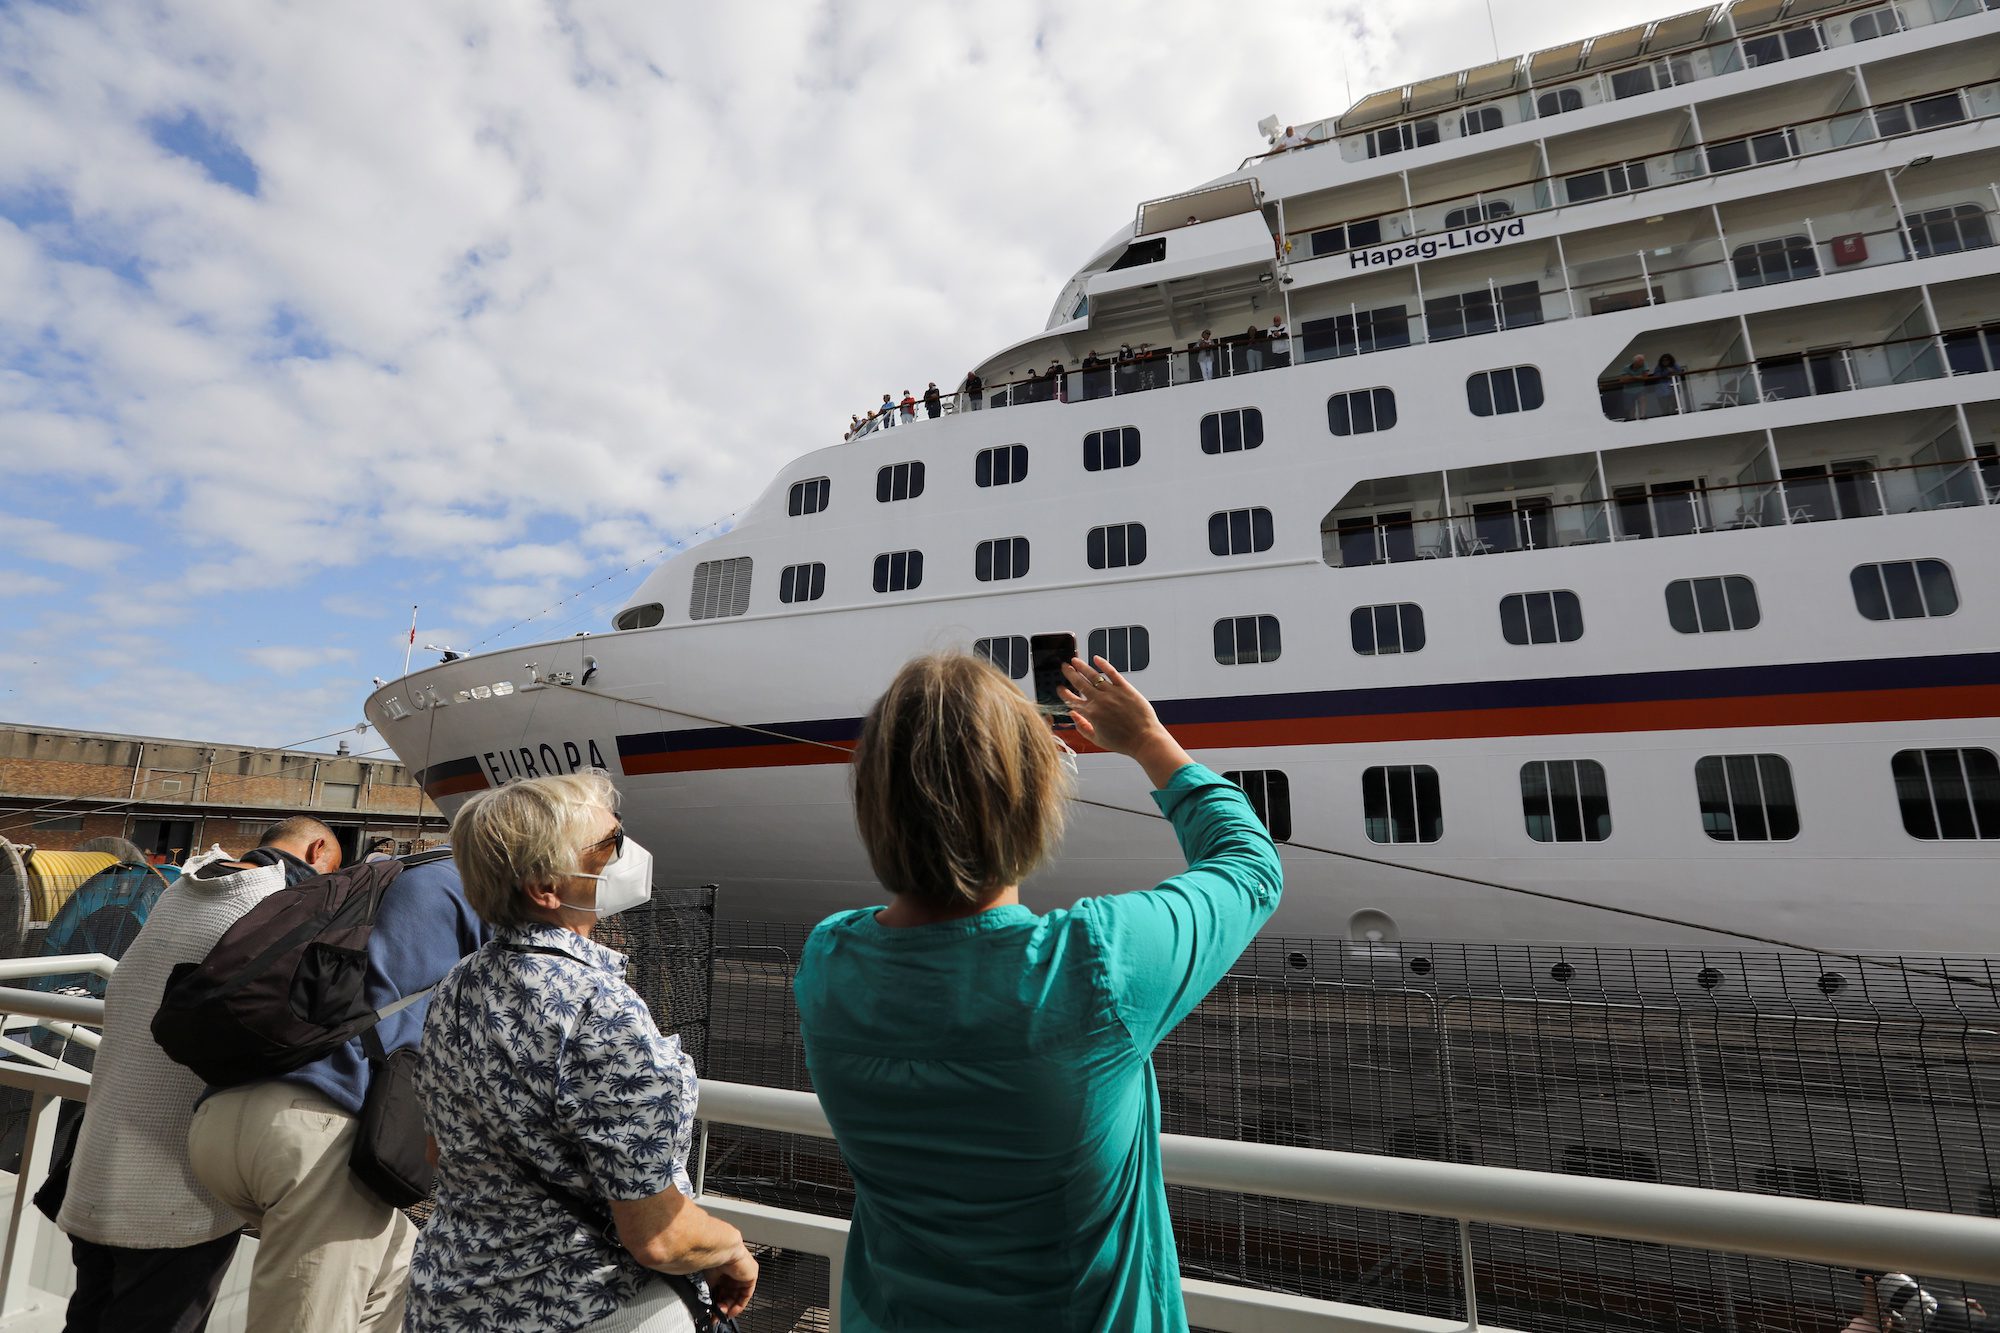 No Cruise Ship Cheer for Cape Town Tourism Amid Omicron Alarm